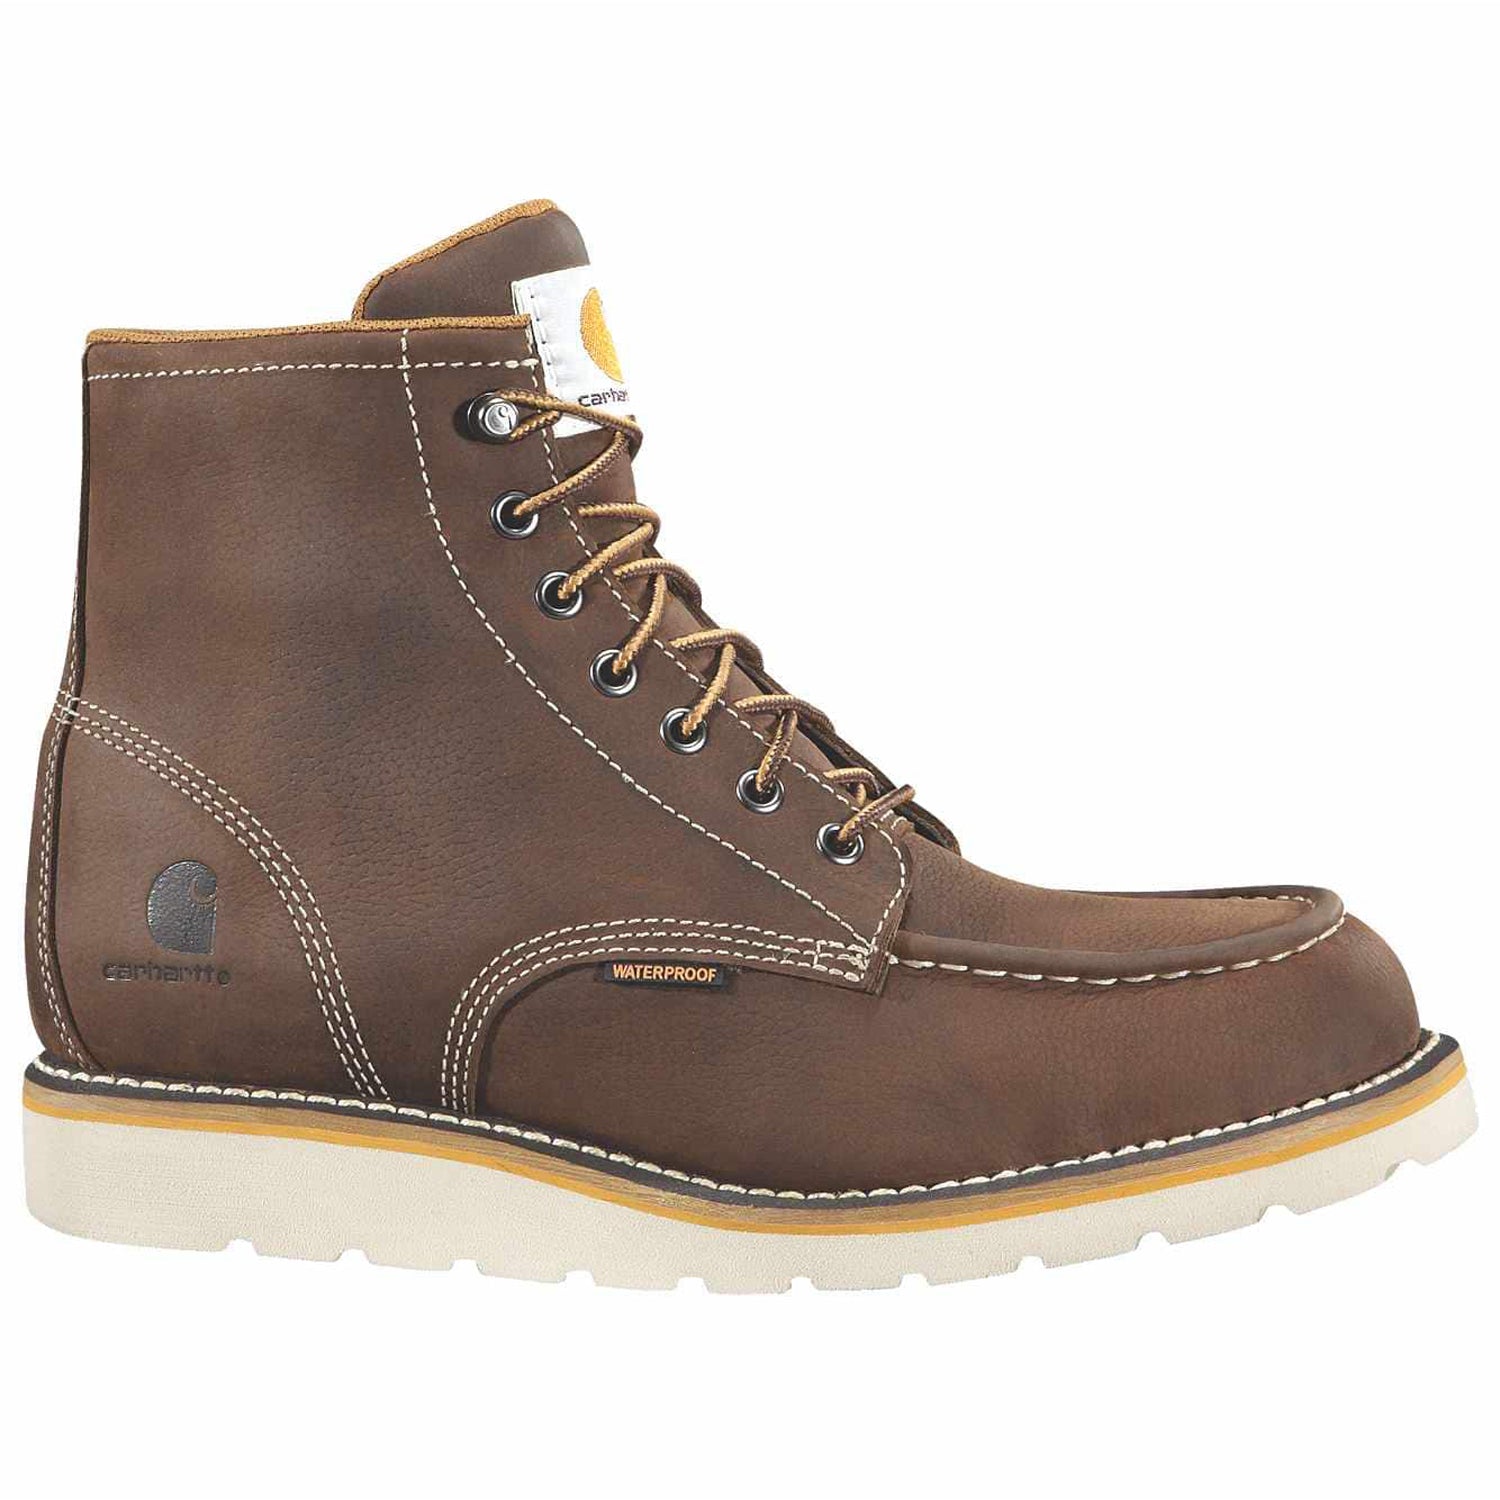 NEW MENS STANLEY LEATHER SAFETY BOOTS WORK STEEL TOE CAP SHOES TRAINERS  HIKING